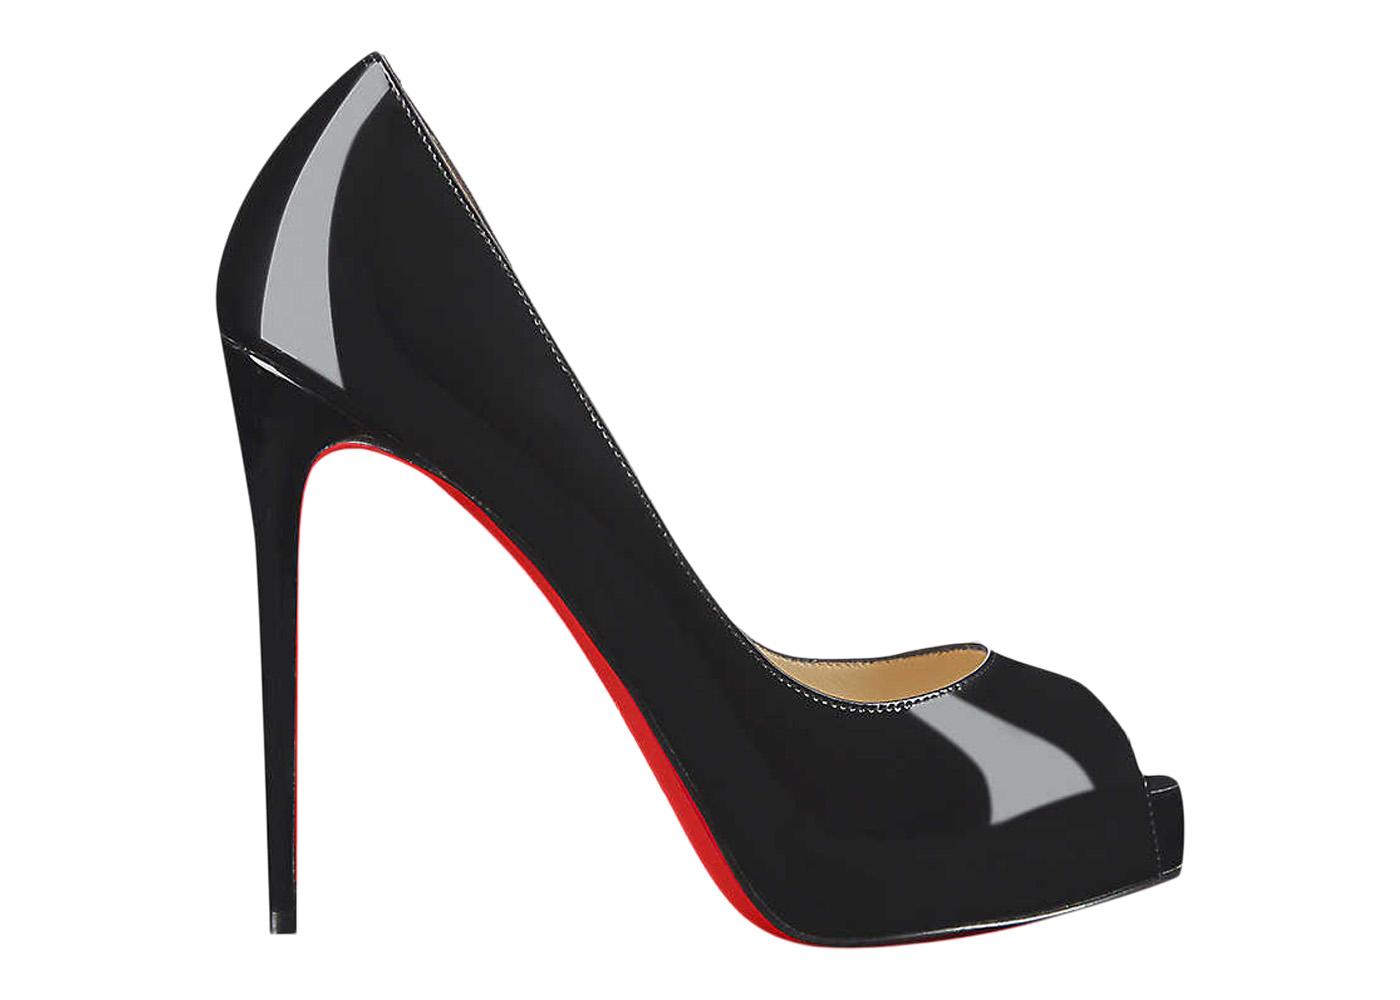 Buy Christian Louboutin Shoes & New Sneakers - StockX